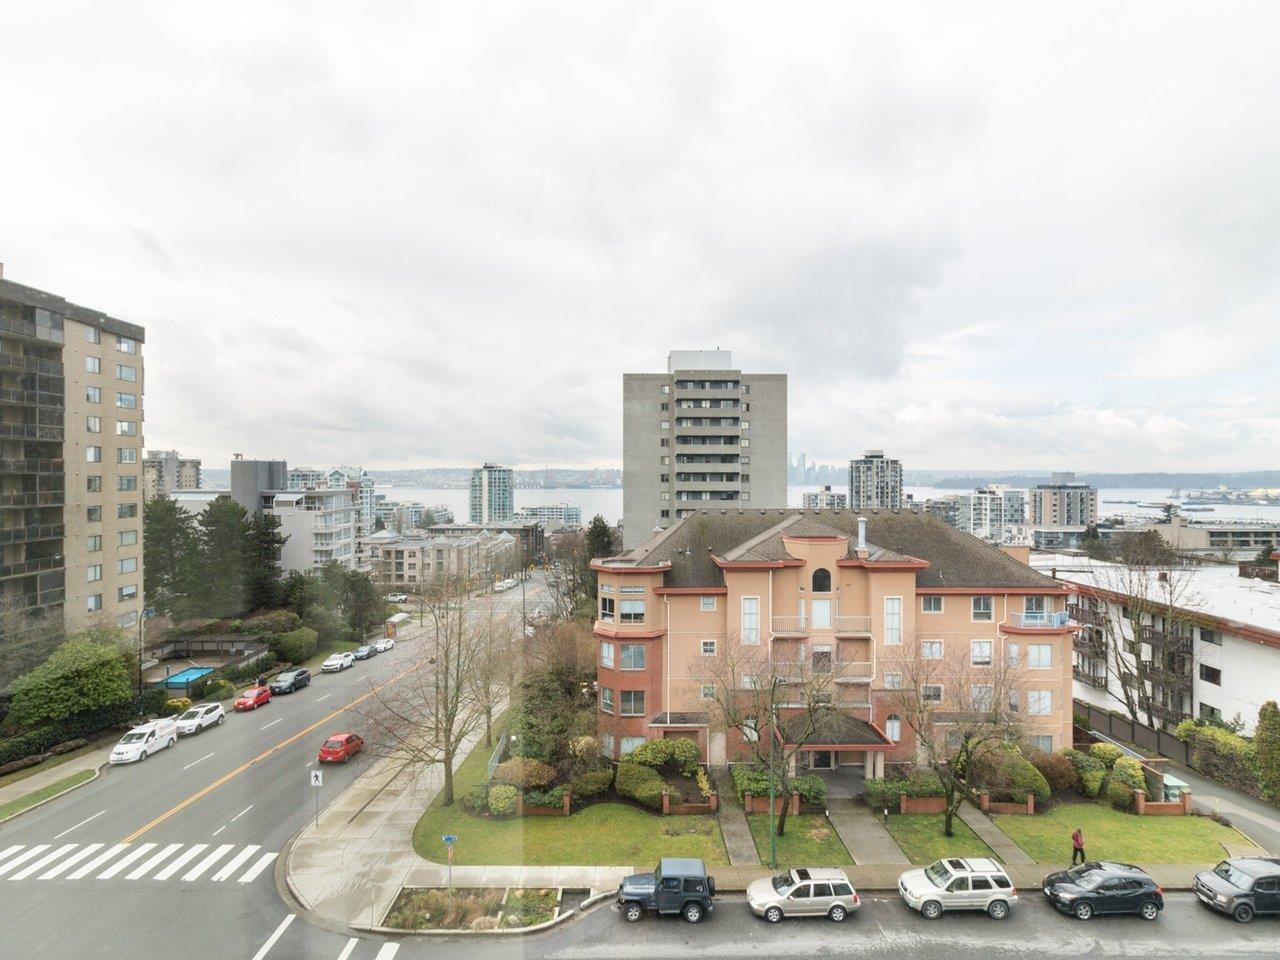 Listing image of 603 505 LONSDALE AVENUE